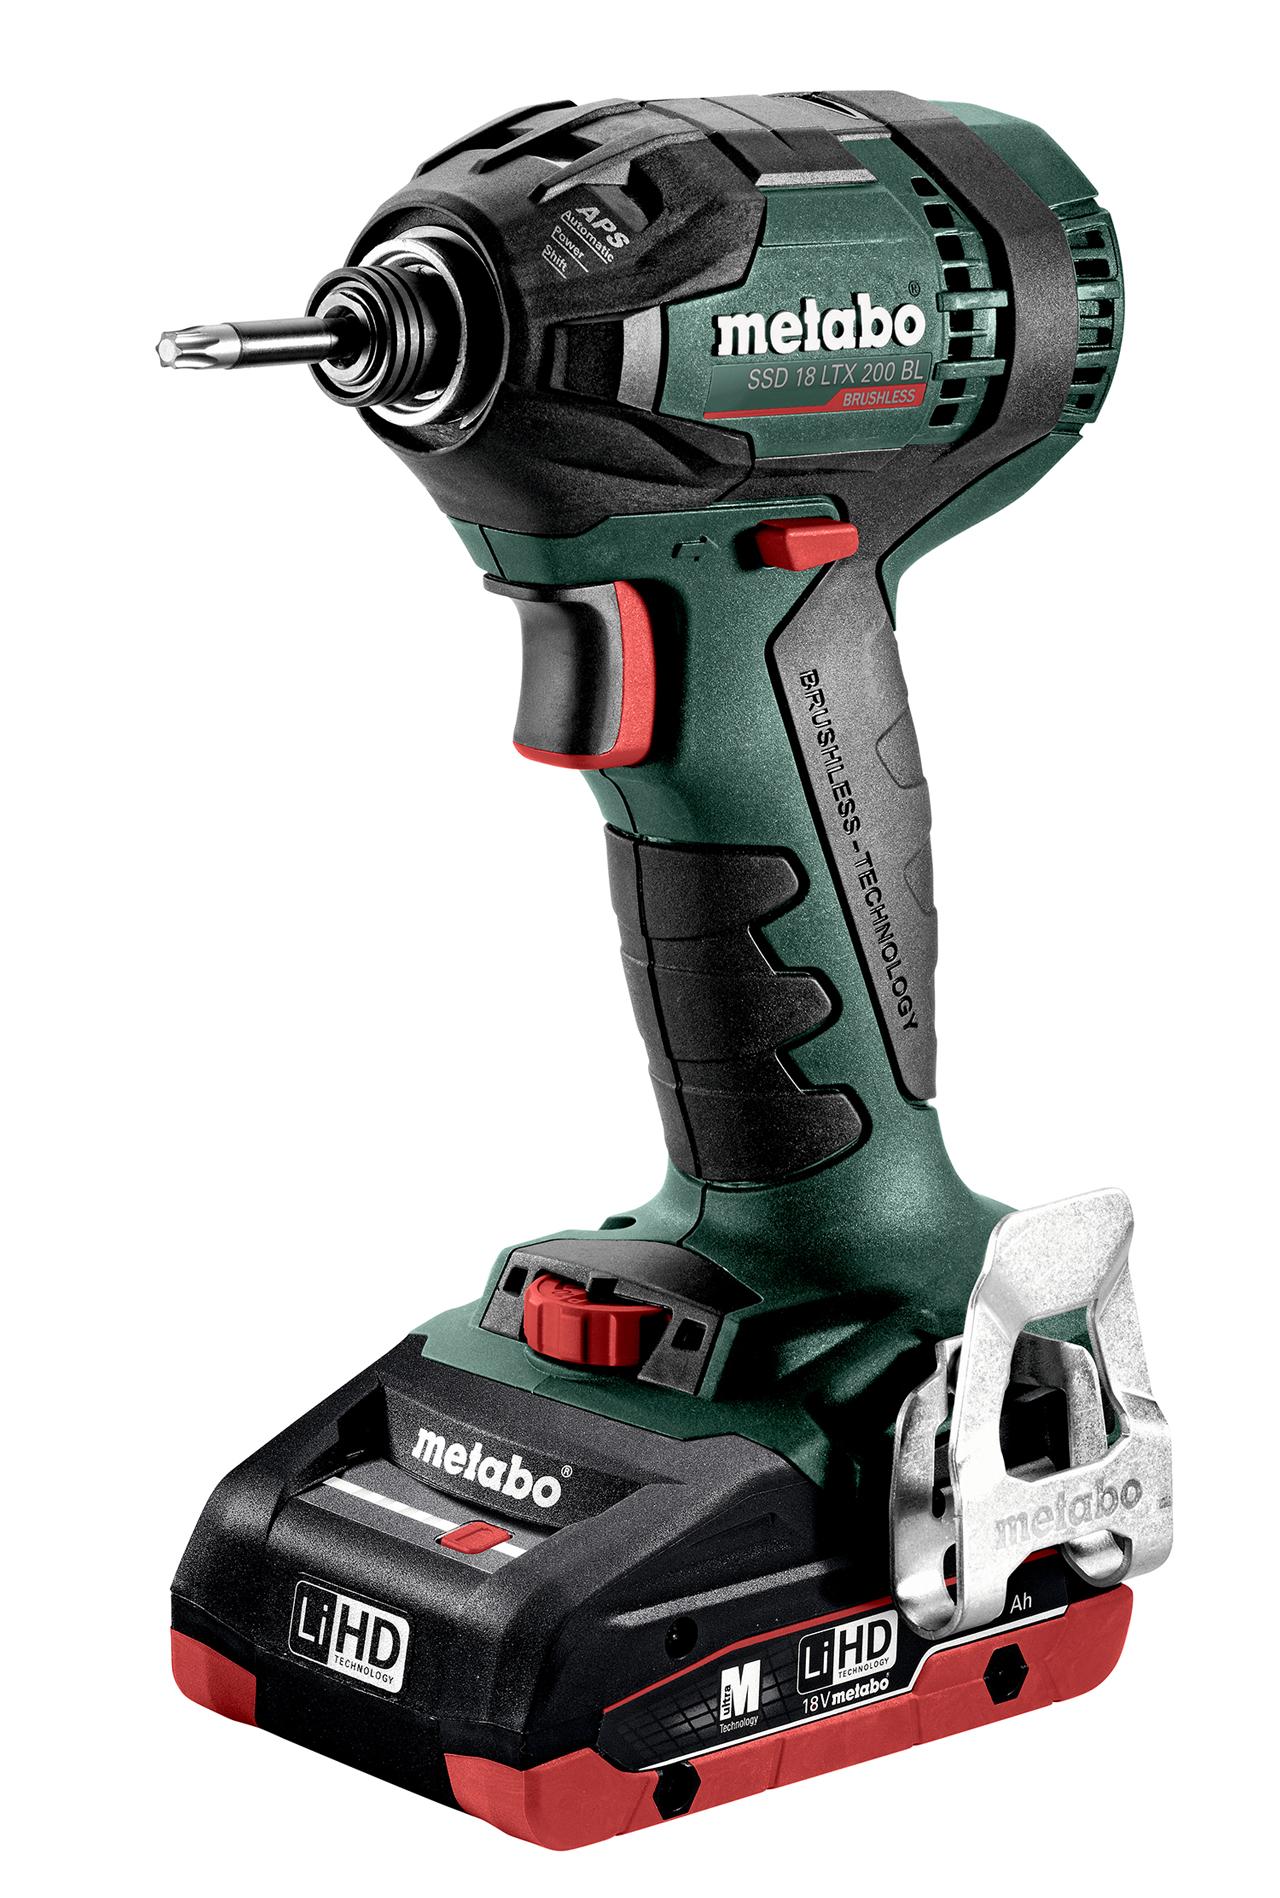 Metabo SSD 18 LTX 200 BL Impact driver 2 x 18V LiHD 4.0Ah, ASC 55 Charger, Carry - Access and Safety Store